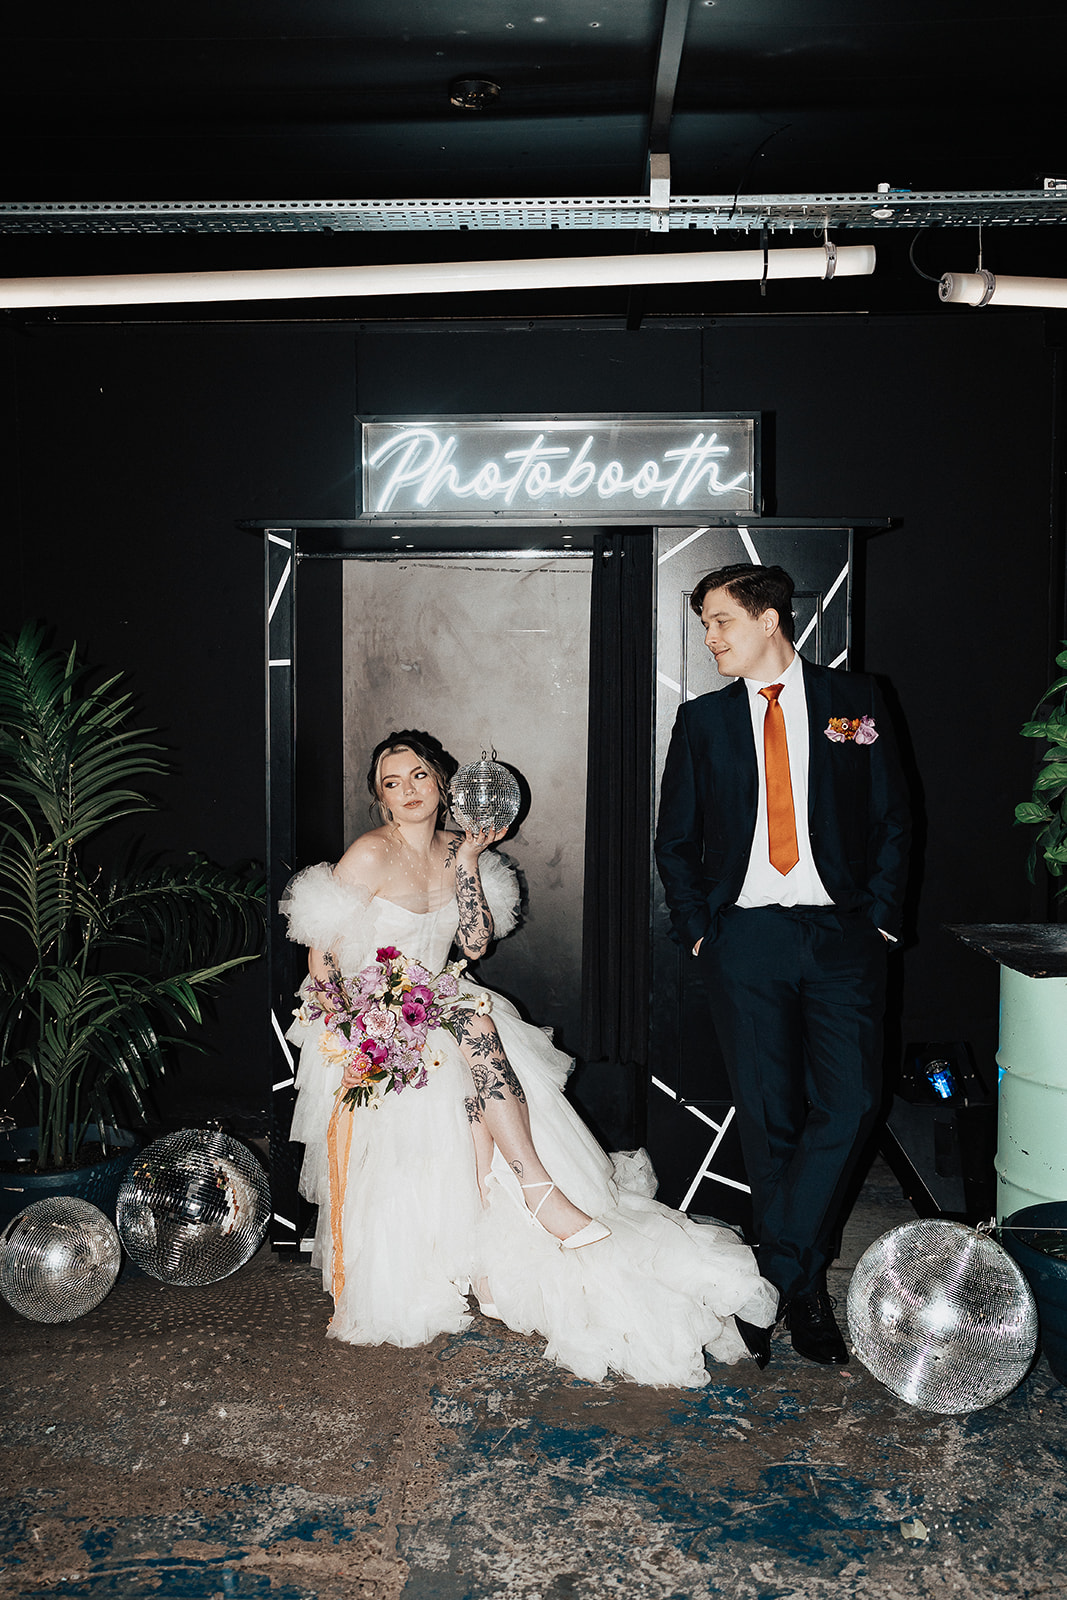 Photo Booth | The Chocolate Factory Wedding Derby